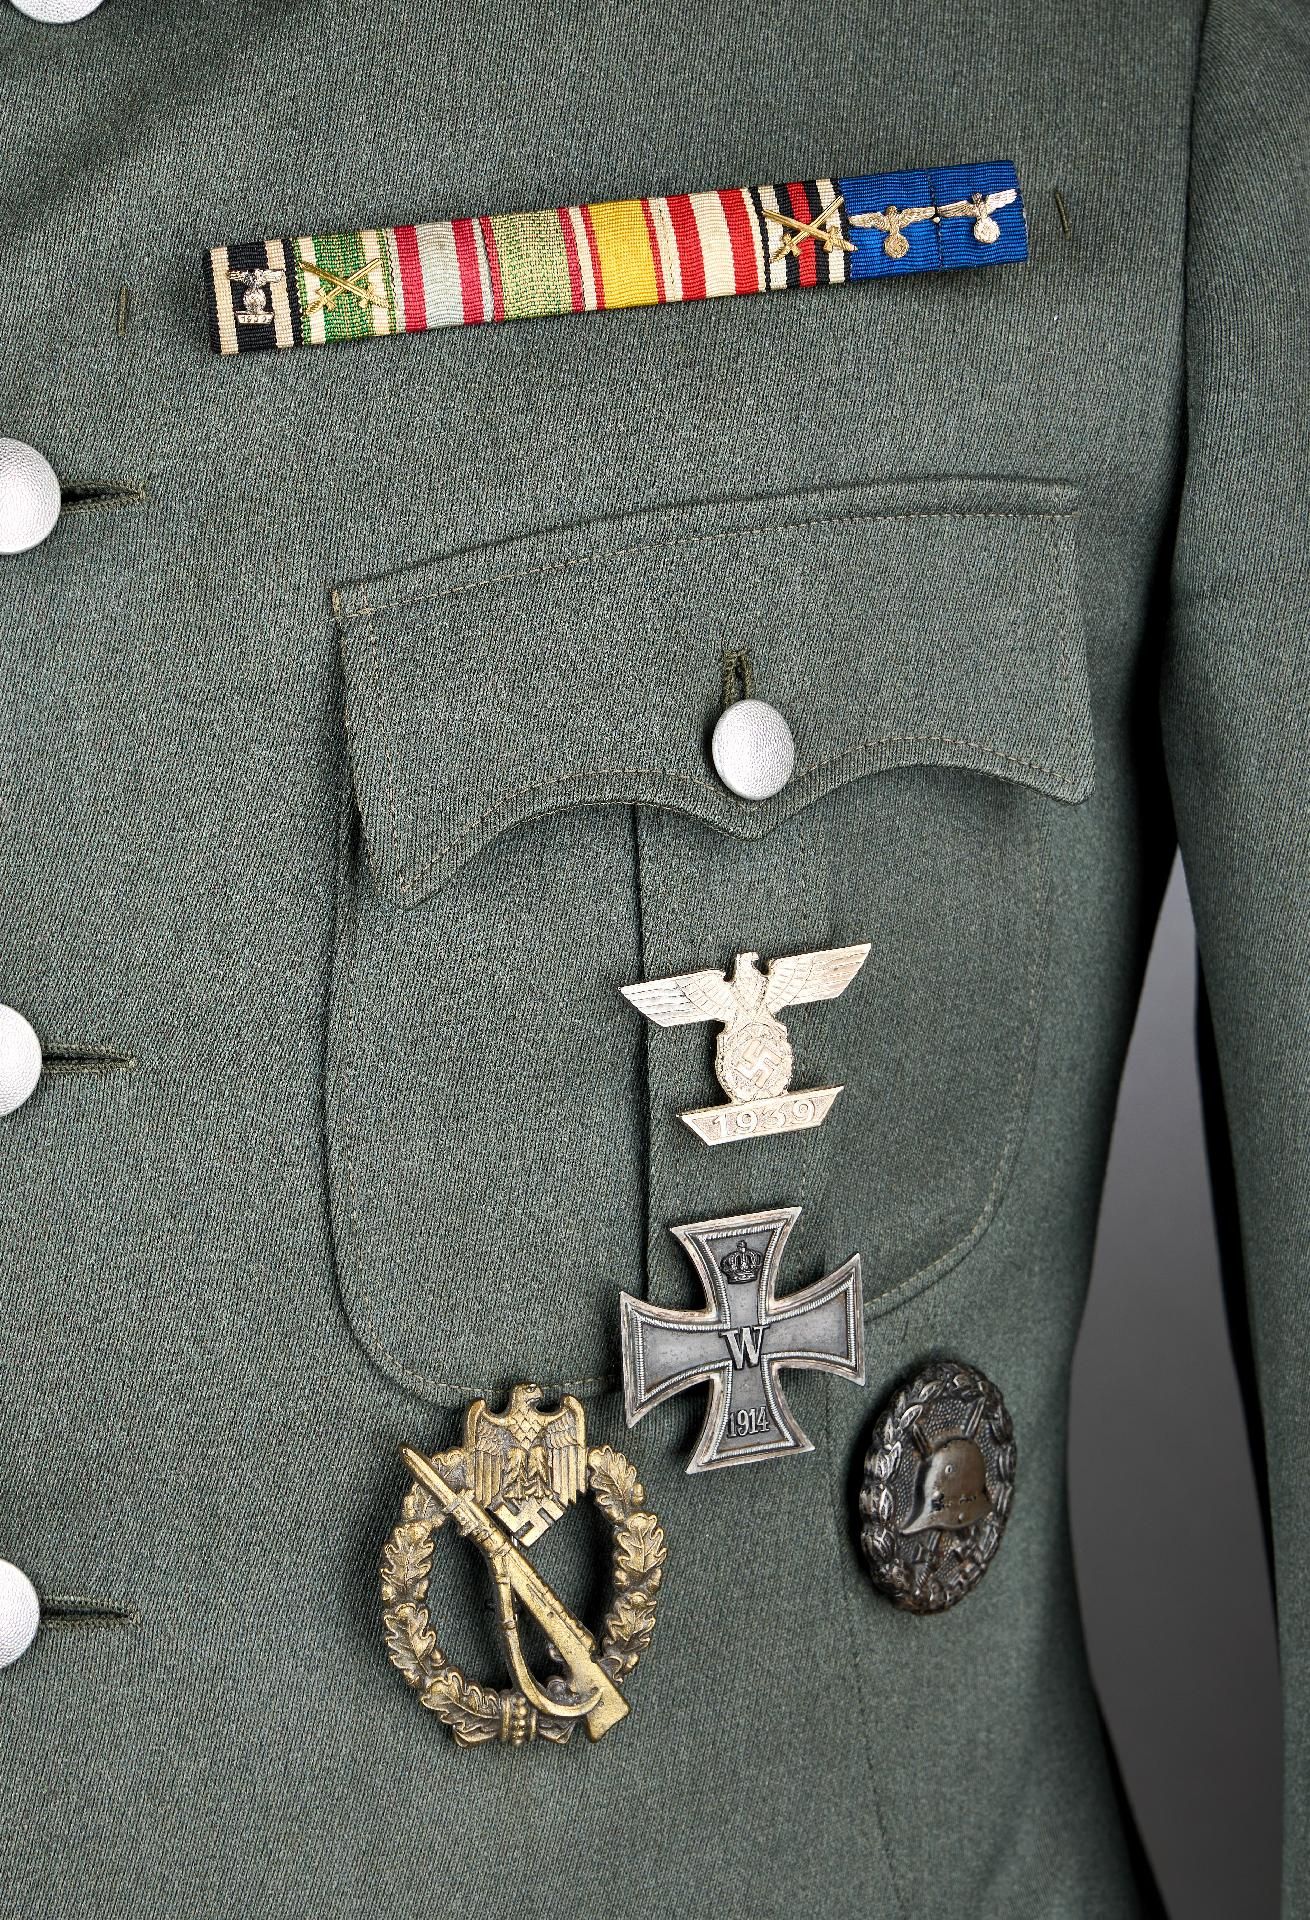 Infanterie : Tunic of an Infantry Regiment 118 Colonel. - Image 3 of 4